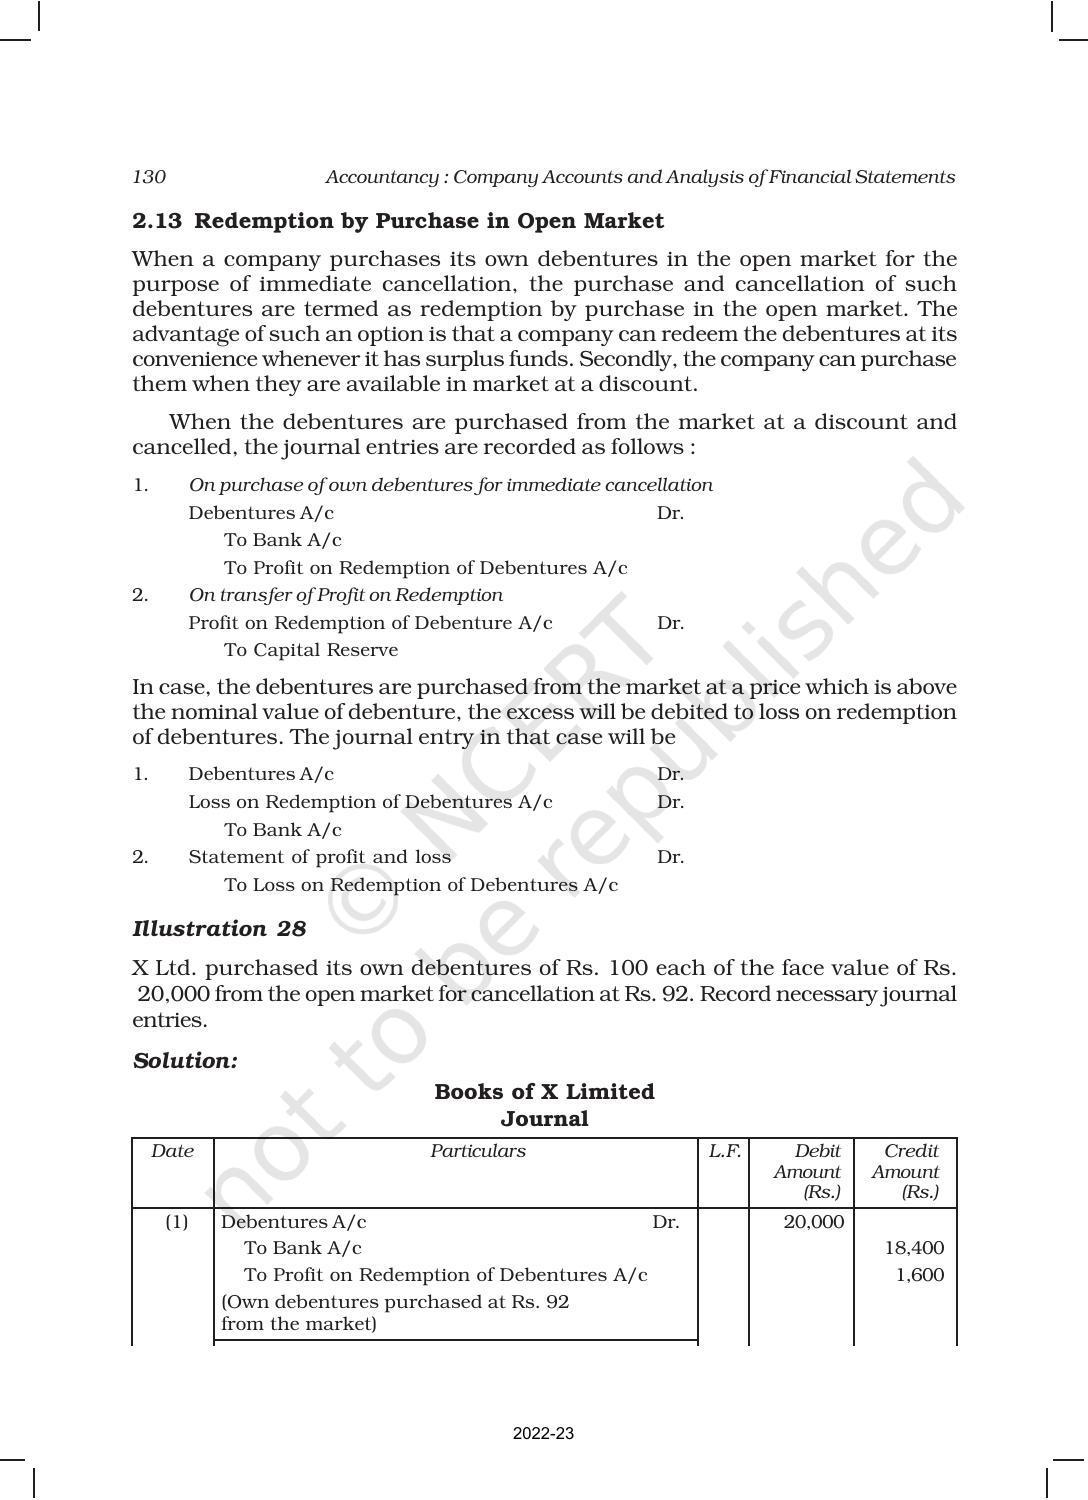 NCERT Book for Class 12 Accountancy Part II Chapter 1 Issue and Redemption of Debentures - Page 56